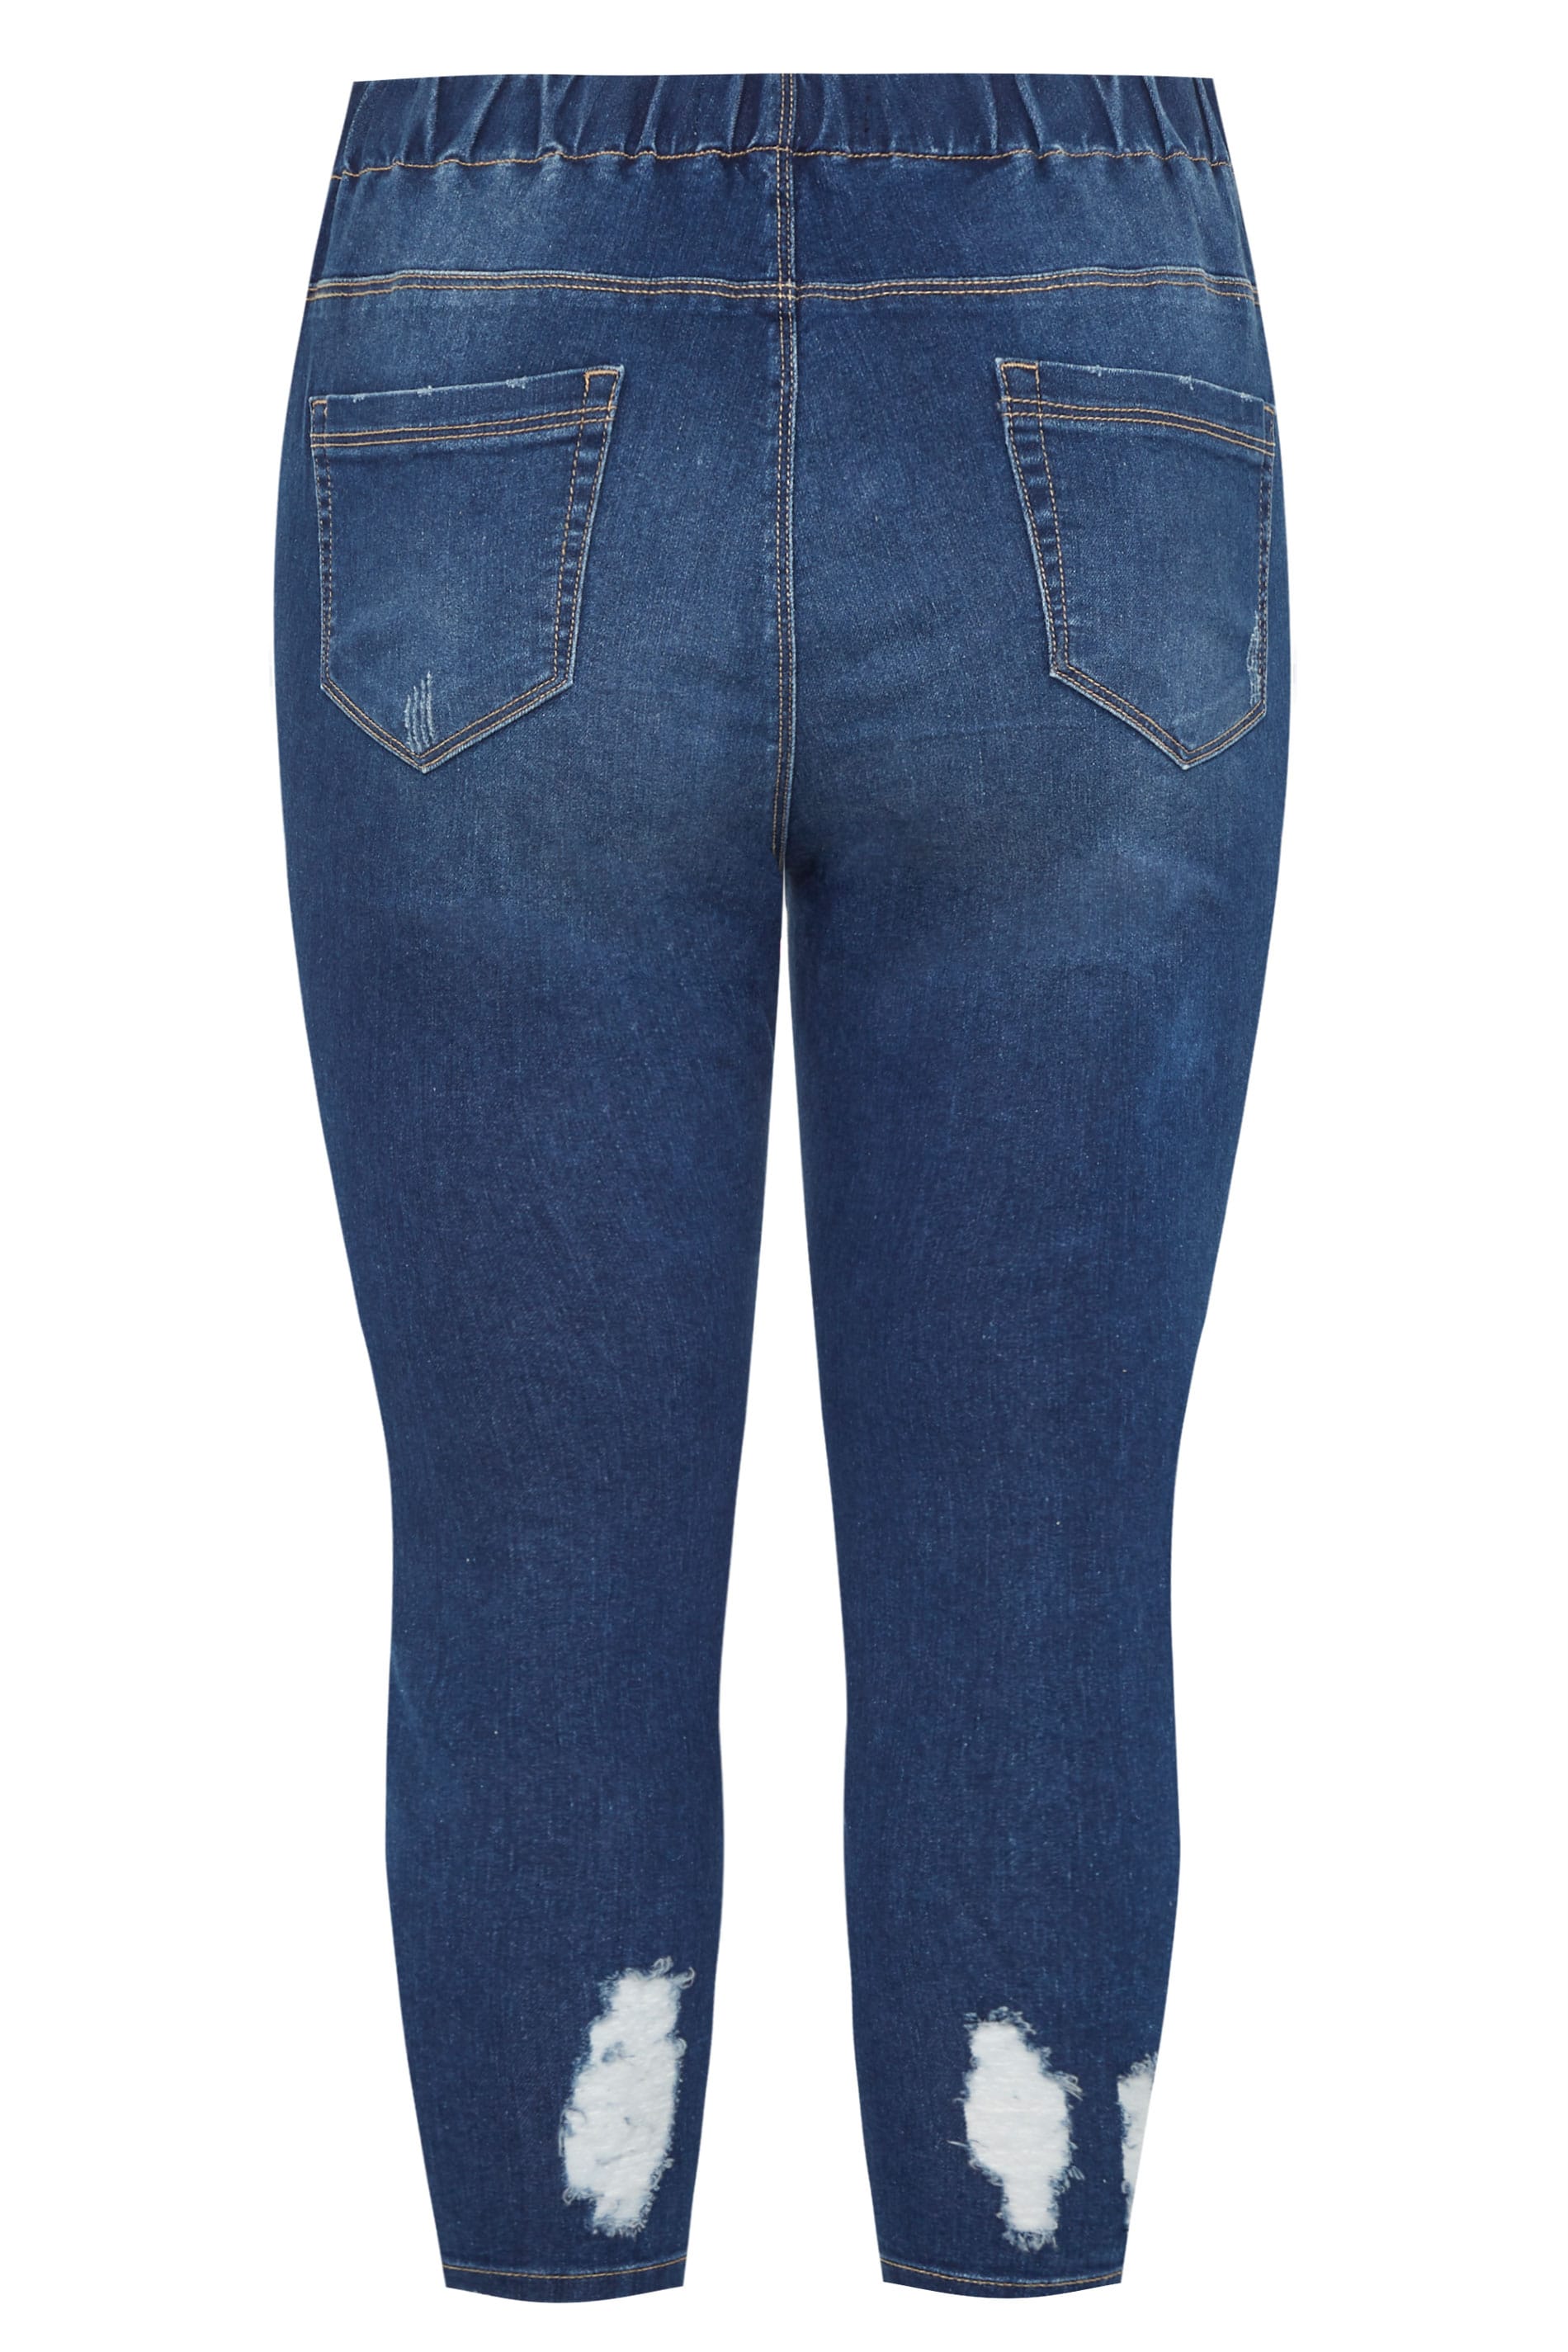 PLus Size YOURS FOR GOOD Indigo Blue Extreme Distressed Cropped Jeggings | Clothing